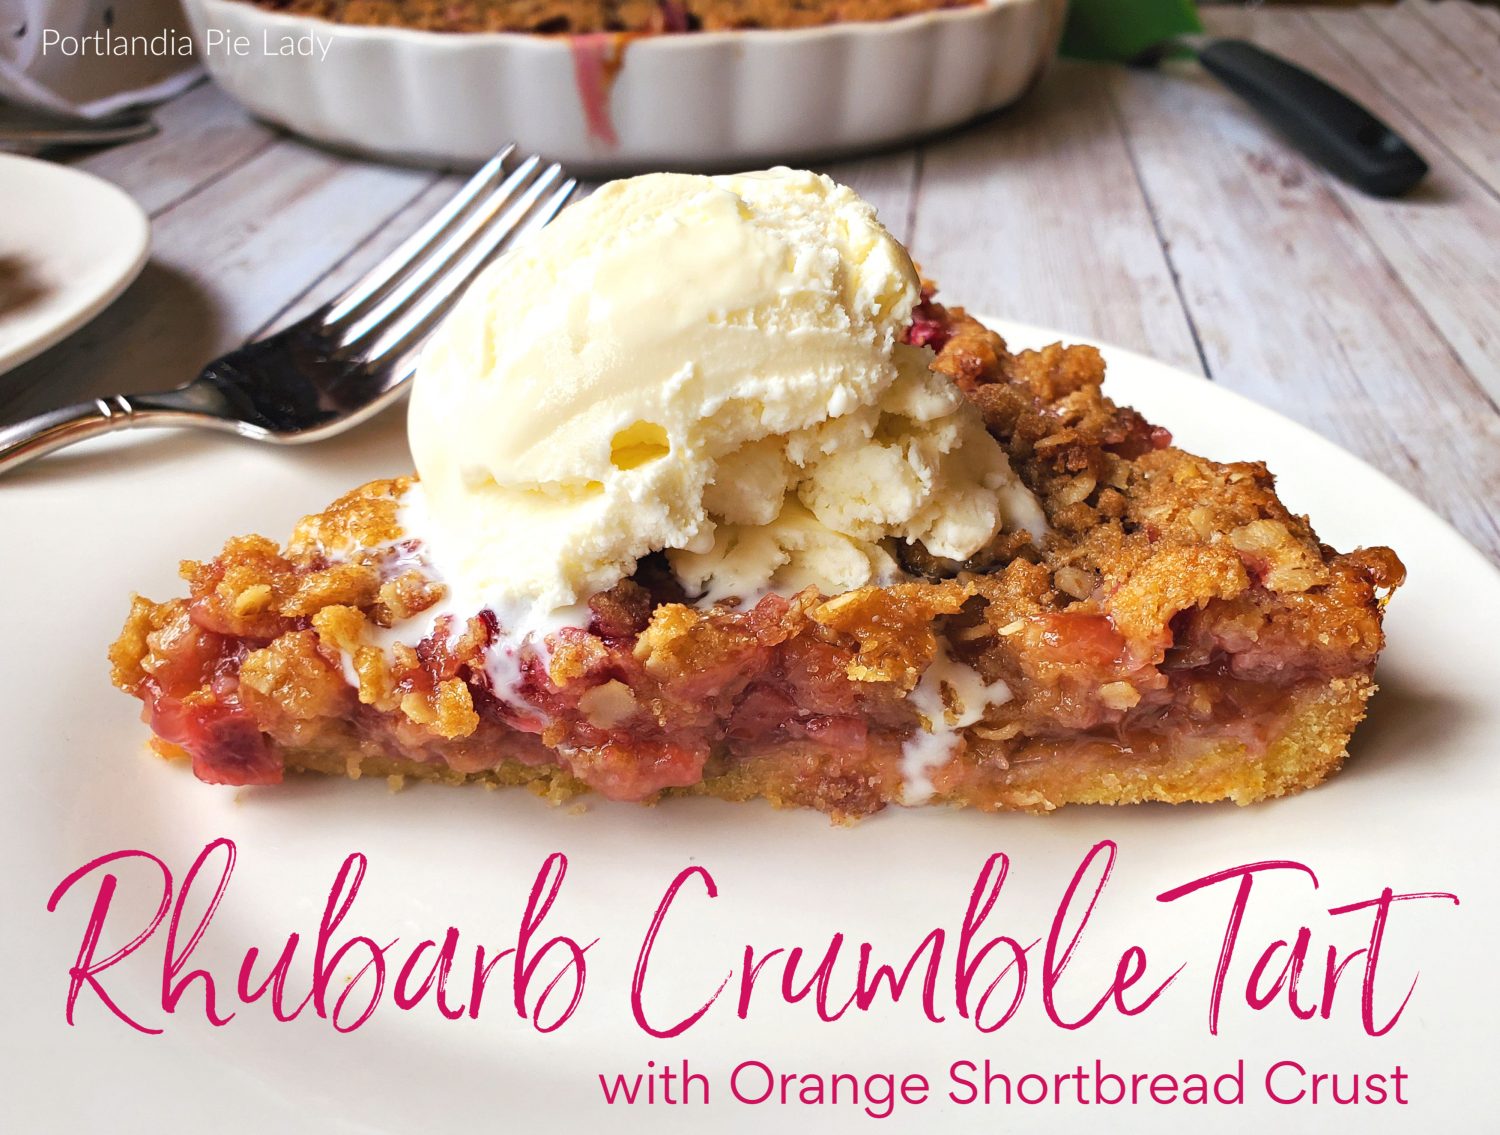 Rhubarb Crumble Tart; orange juice brightens the flavor, with a tender buttery orange shortbread crust & a crispy crumble topping that screams summertime!